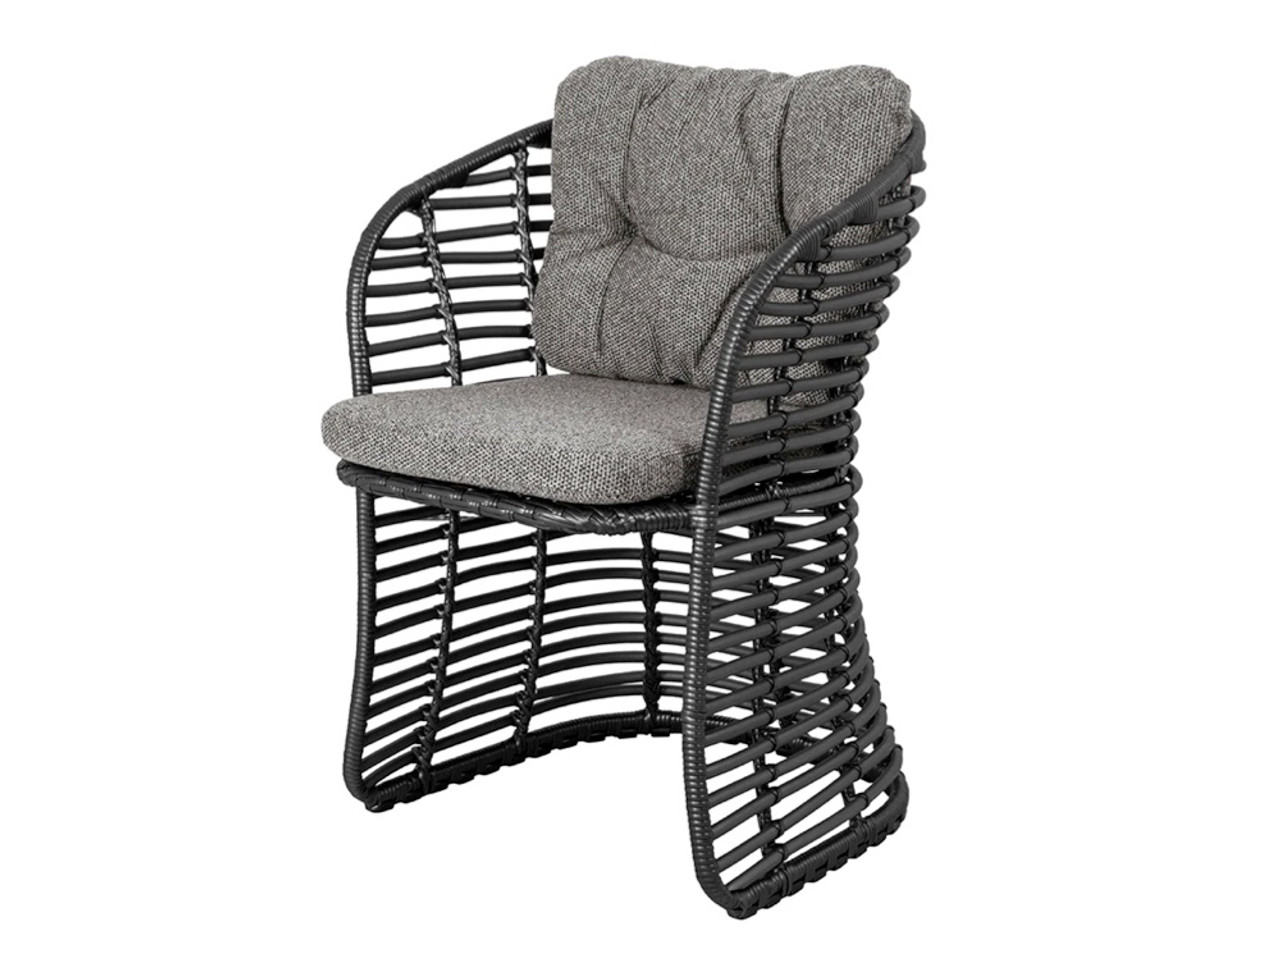 Basket Dining Chair